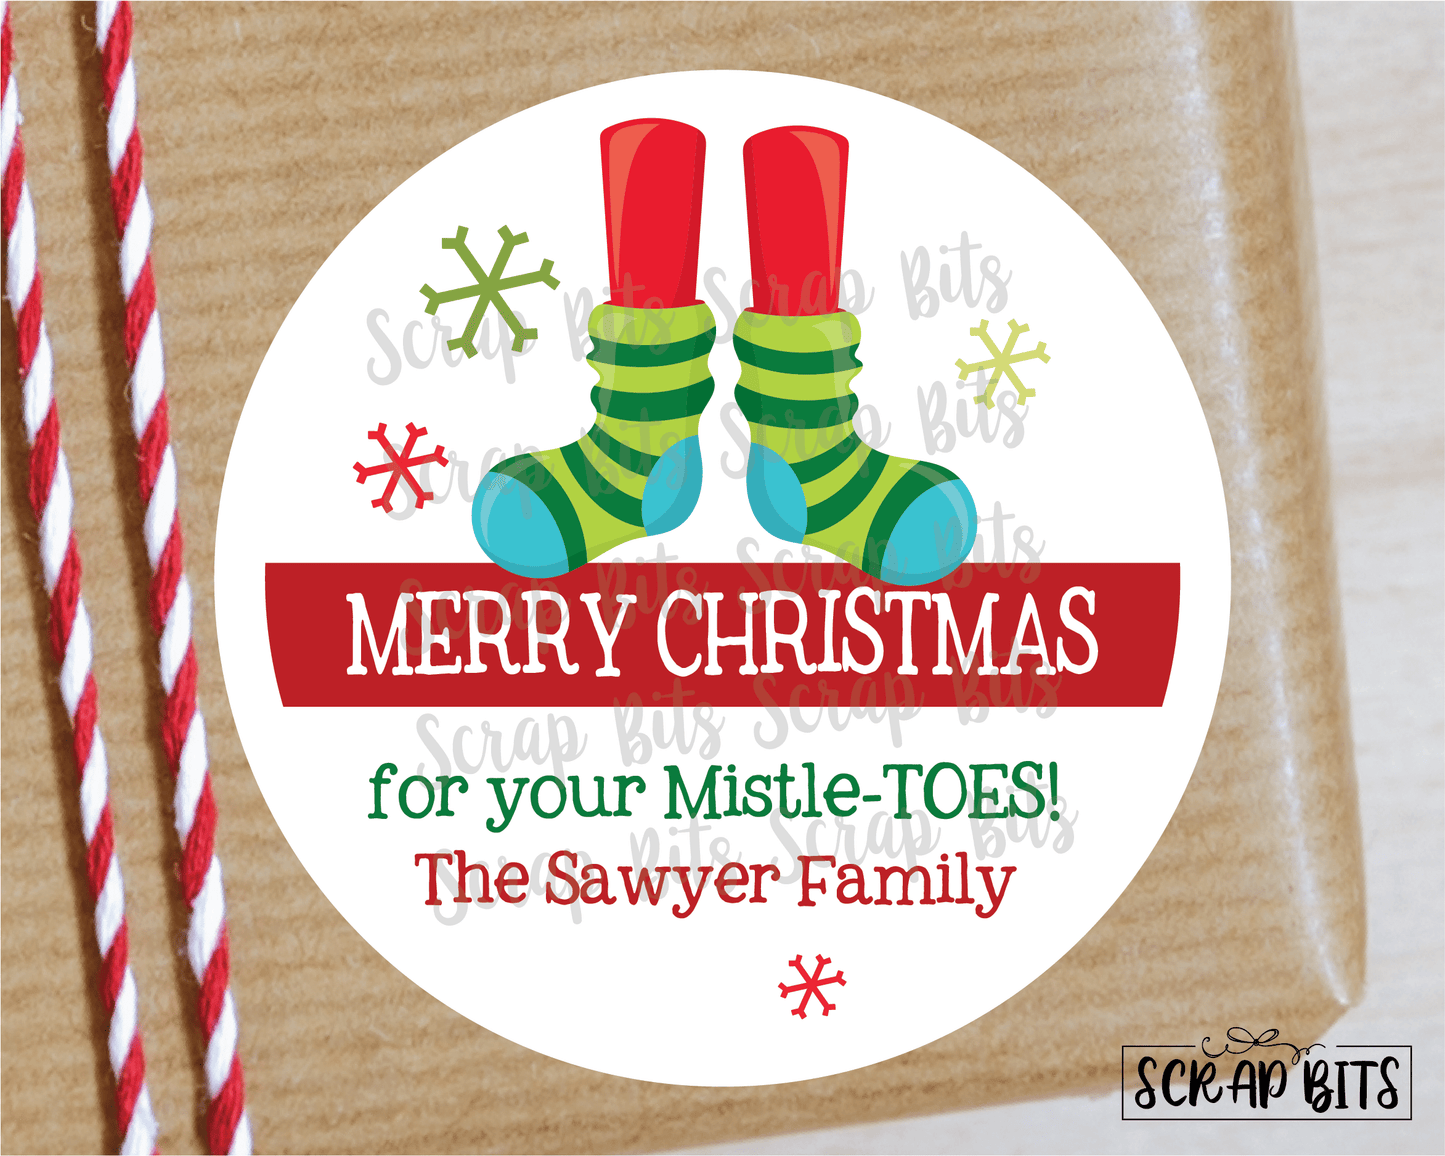 For Your Mistle-toes Christmas Socks Stickers or Tags. Christmas Gift Labels - Scrap Bits